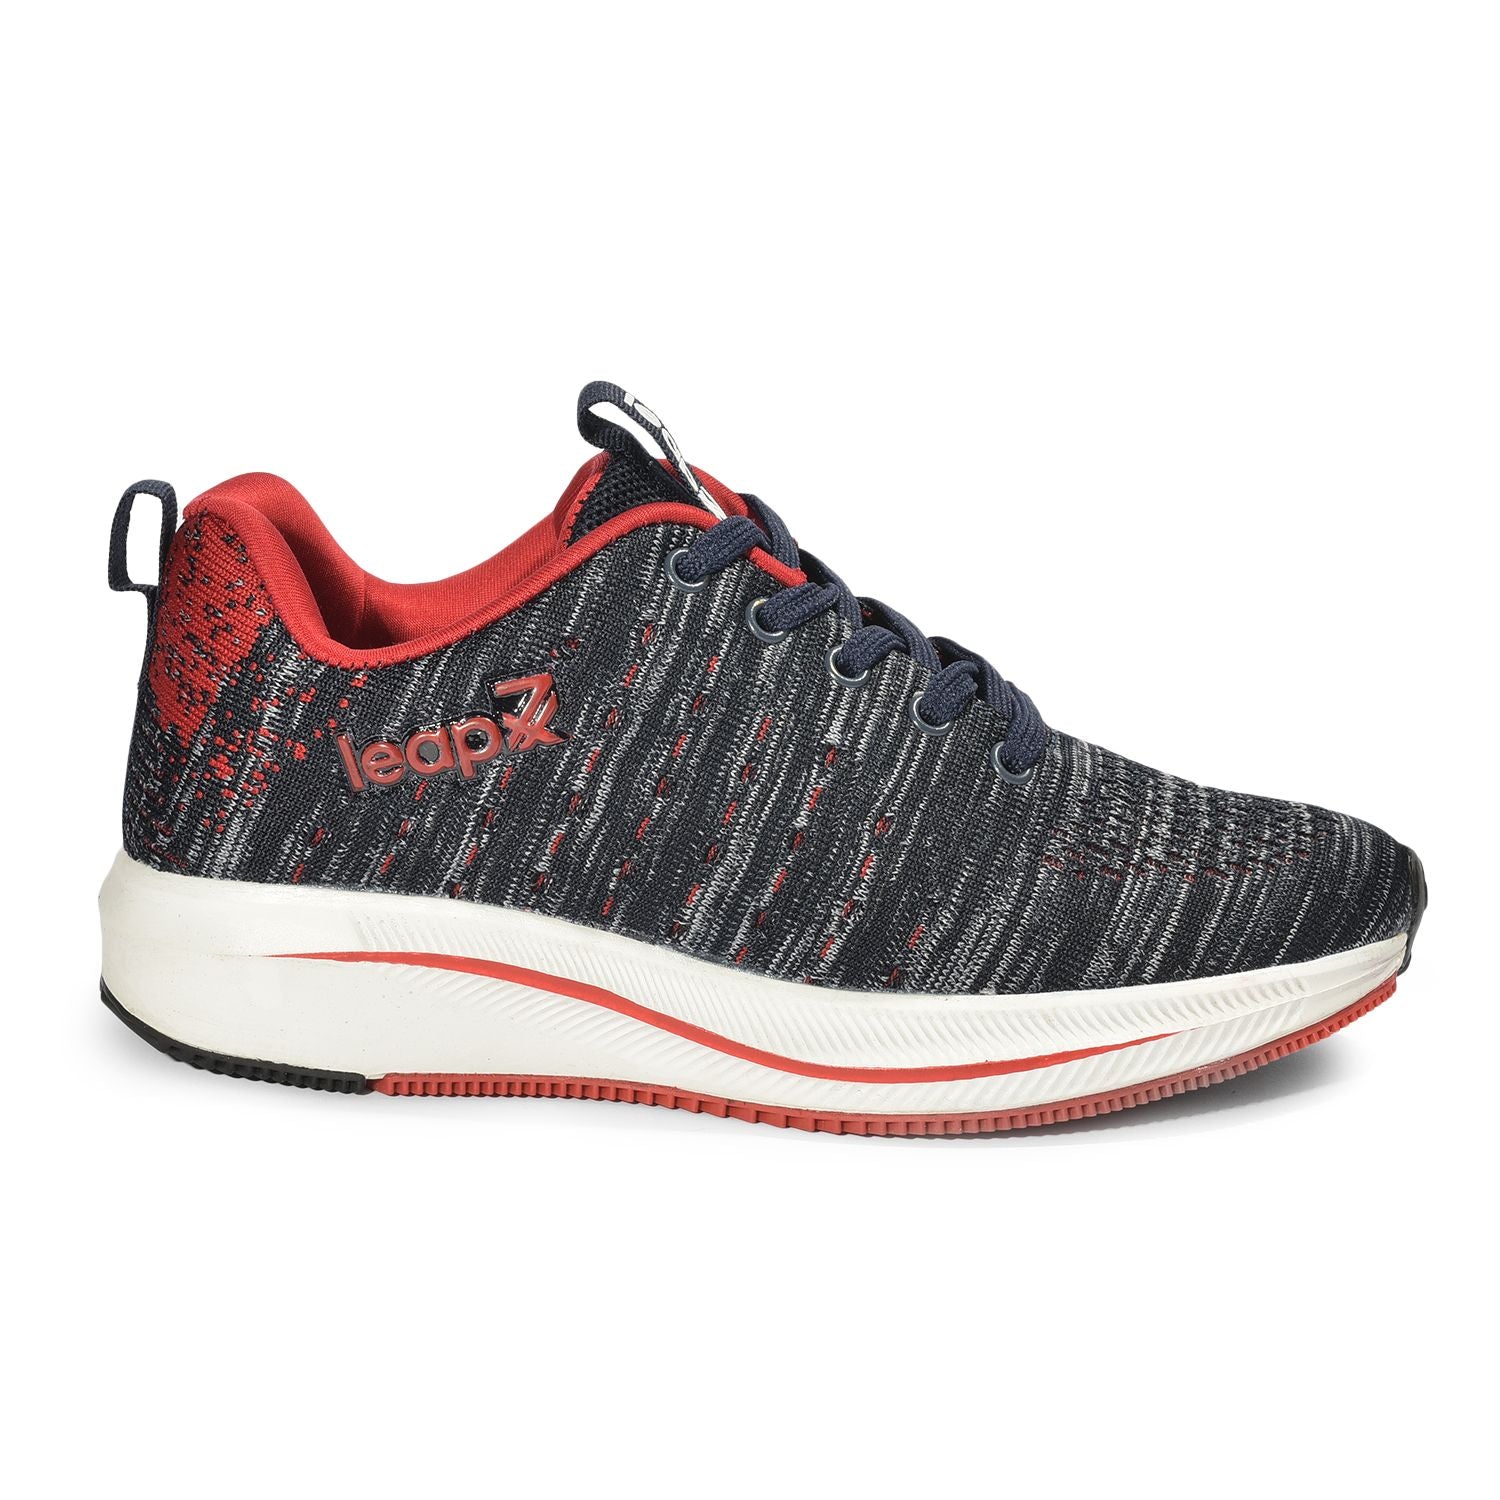 LEAP7X By Liberty Sports Shoes For Women (59780091)